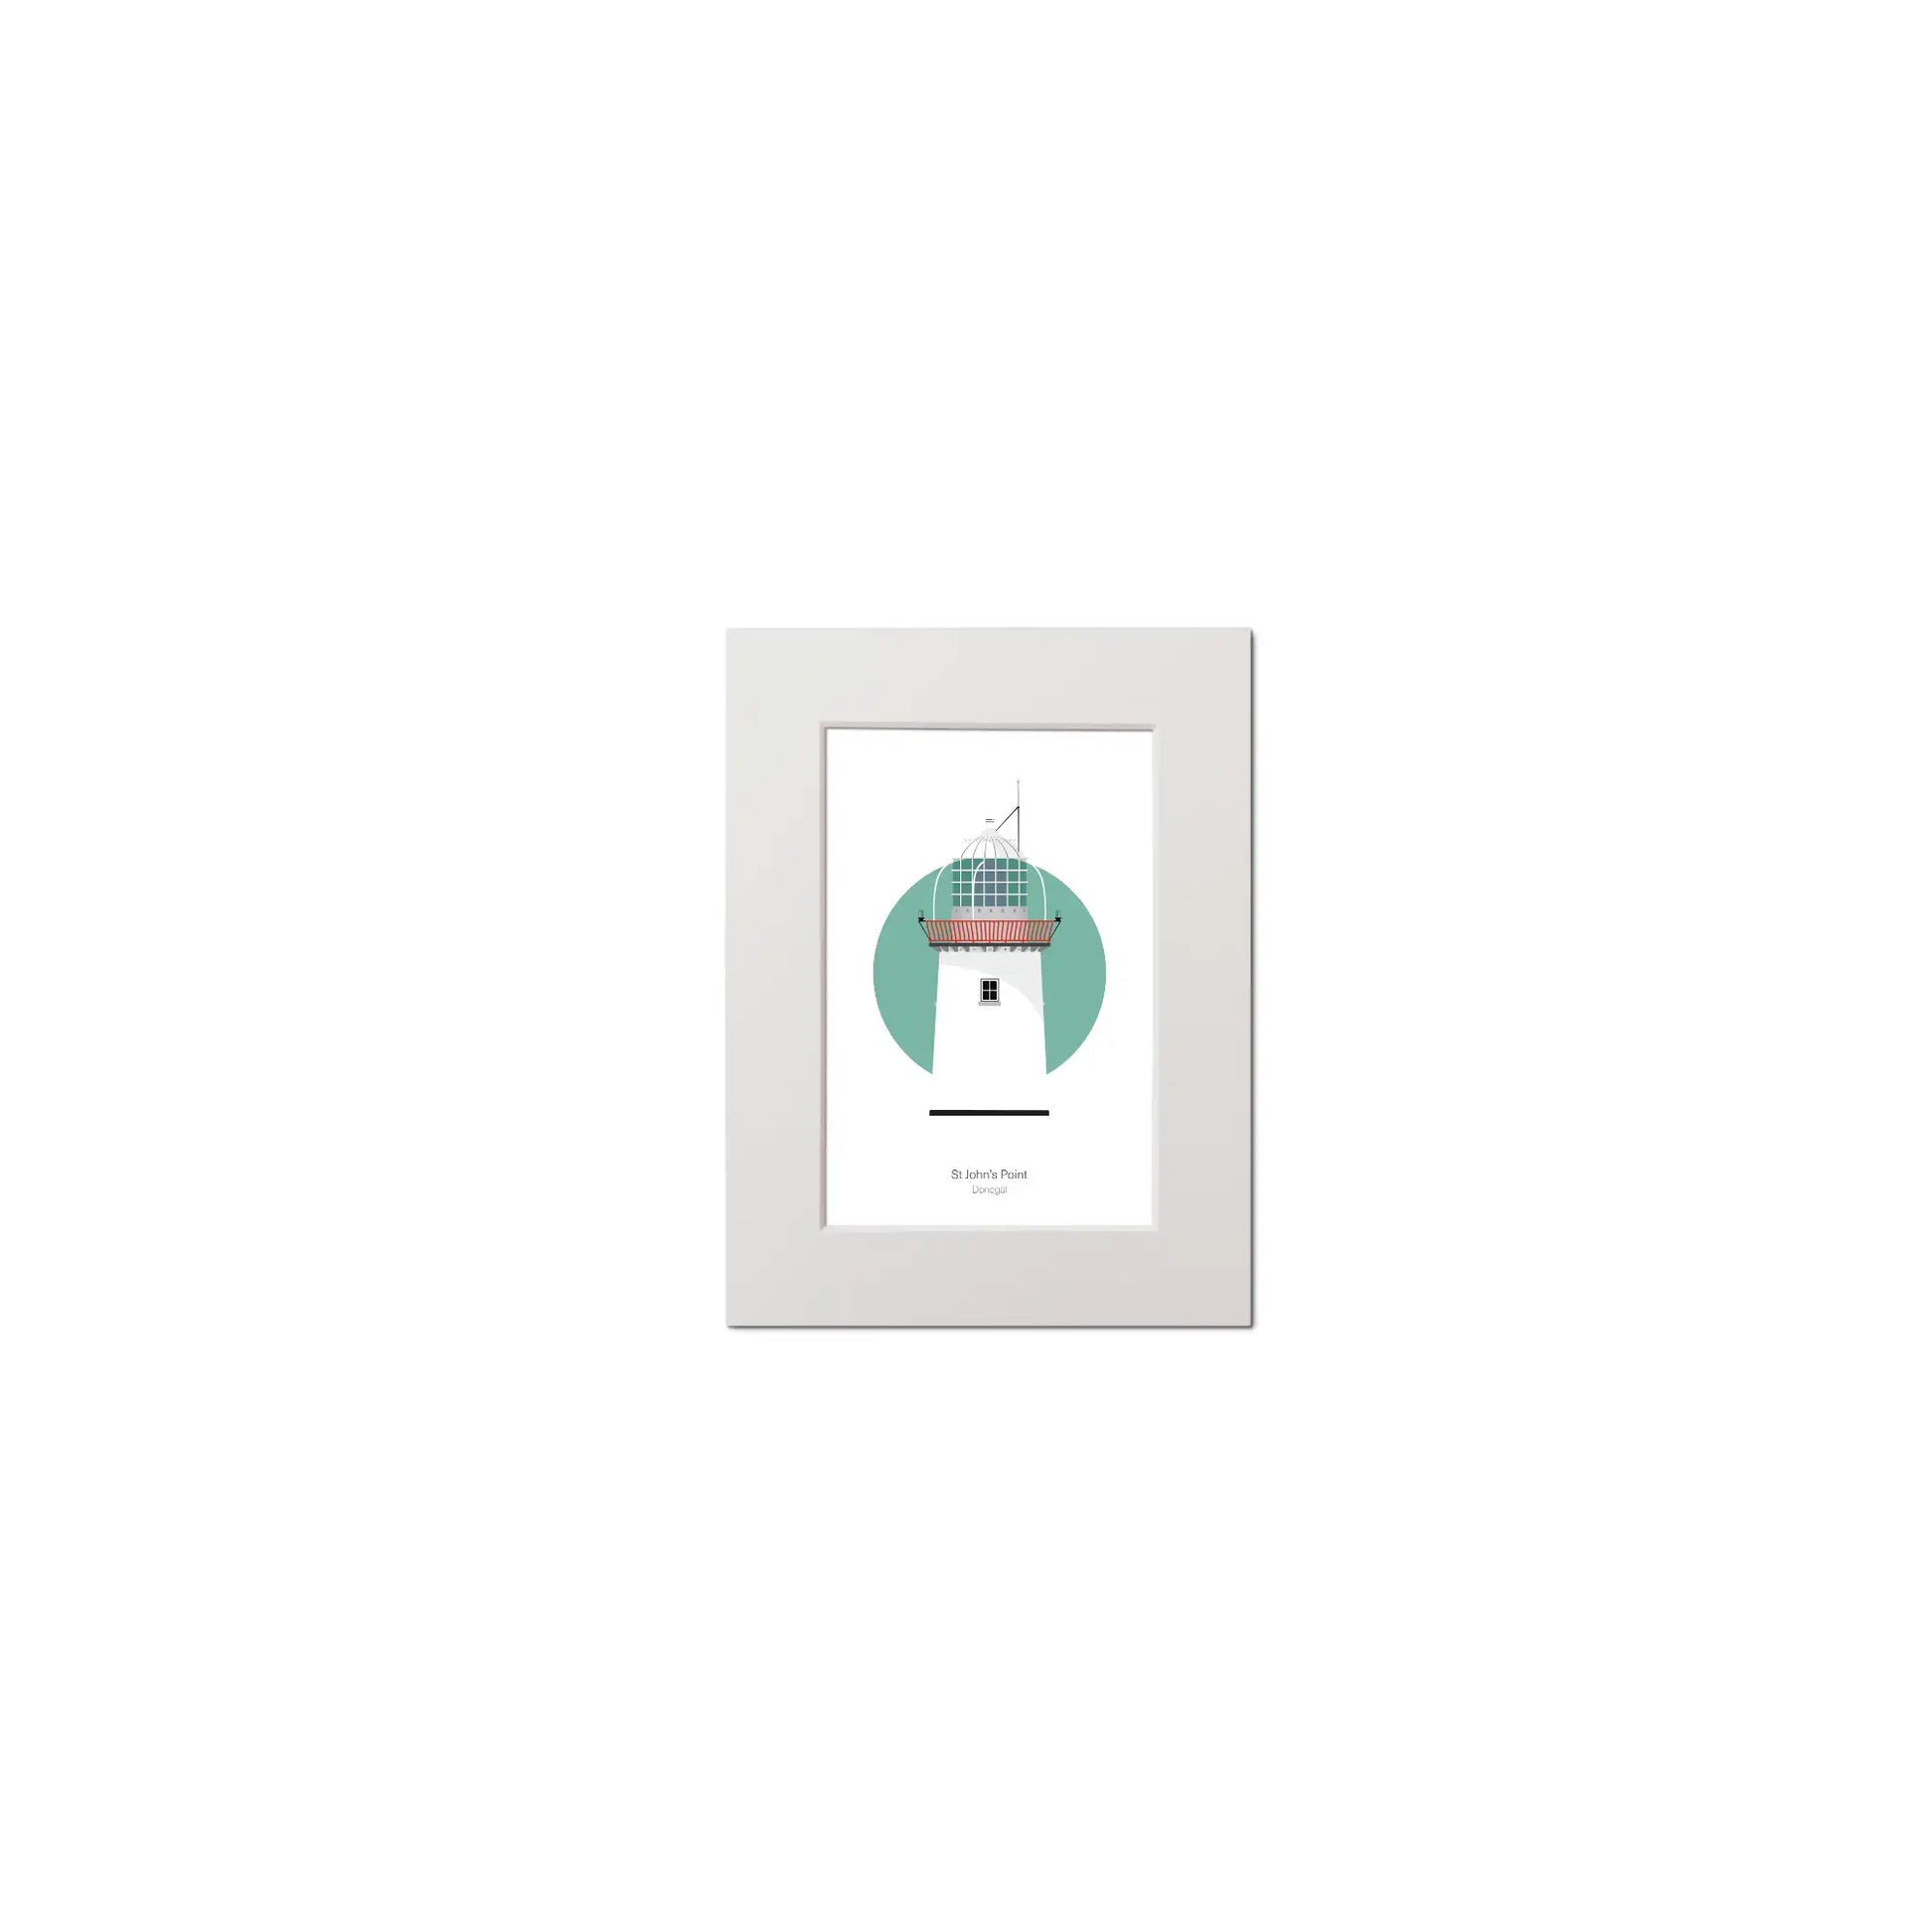 Illustration of St. John's lighthouse on a white background inside light blue square, mounted and measuring 15x20cm.